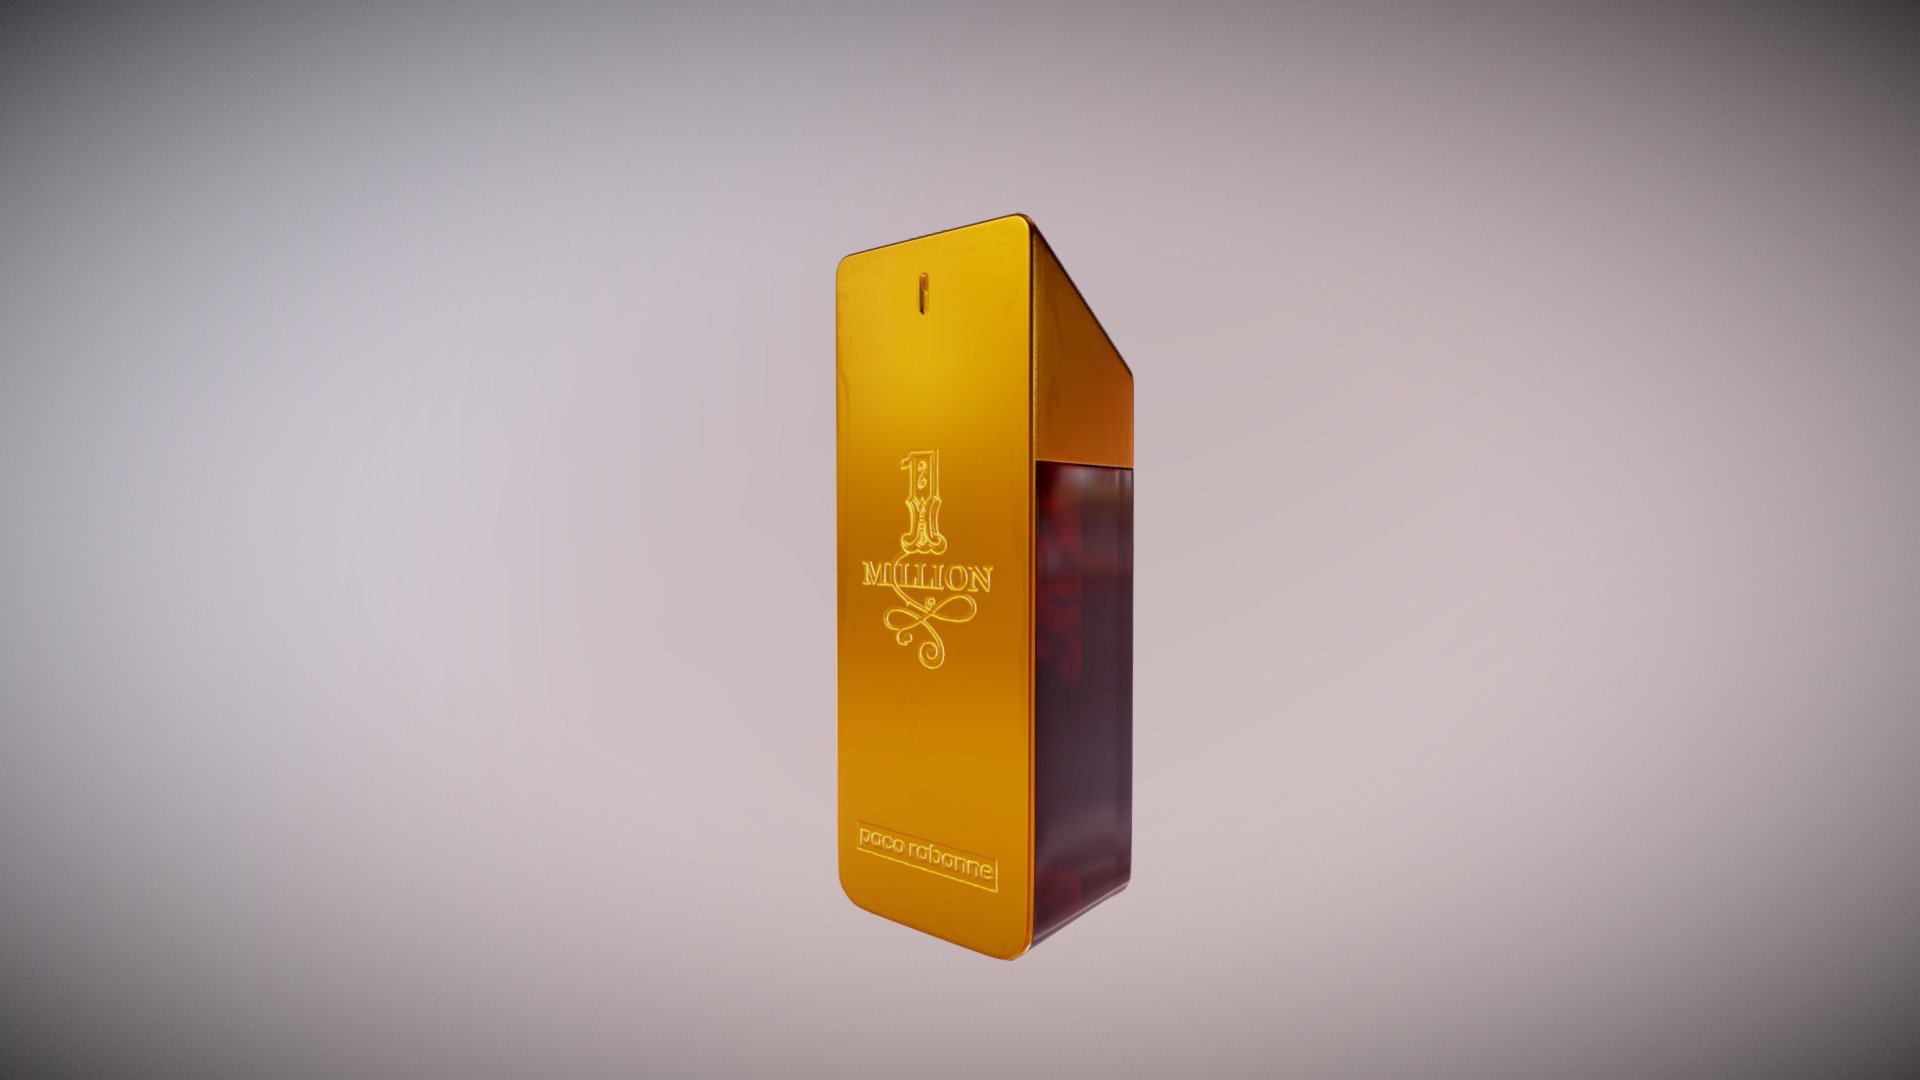 Paco Rabanne 1 Million version with .blend file.
Textures with normal also attached 3d model